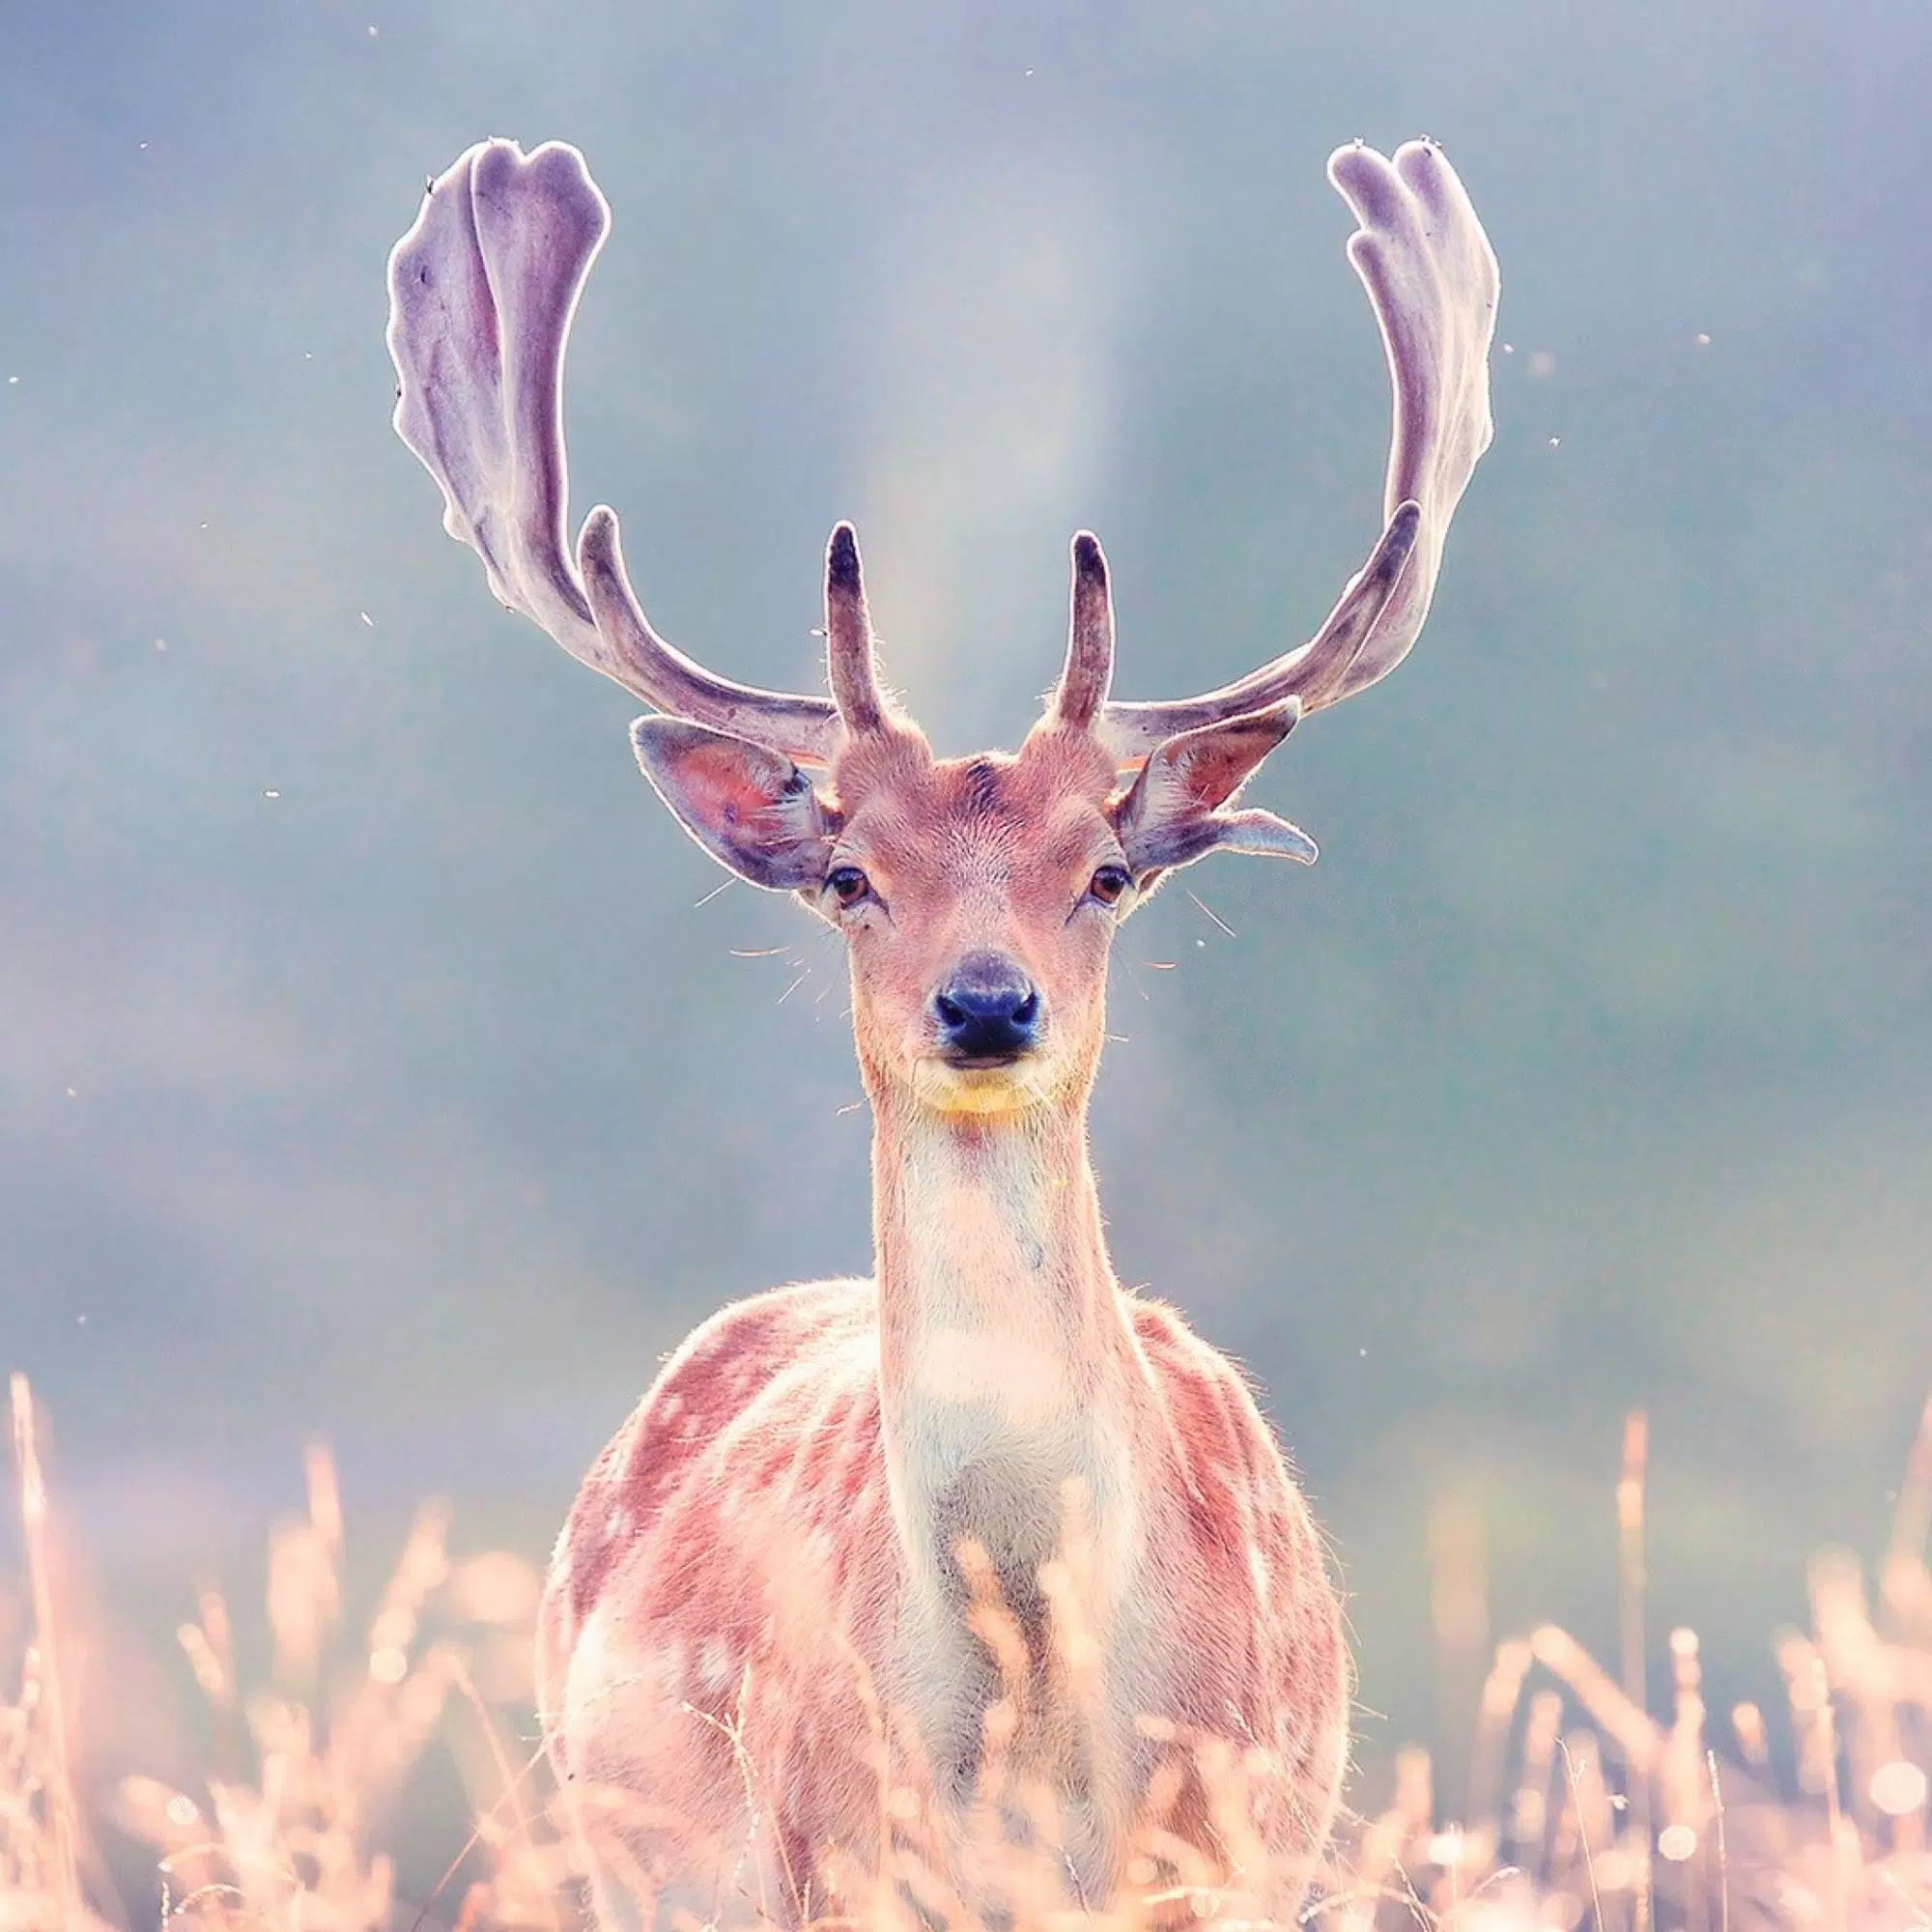 A deer with large antlers standing in the grass - Deer